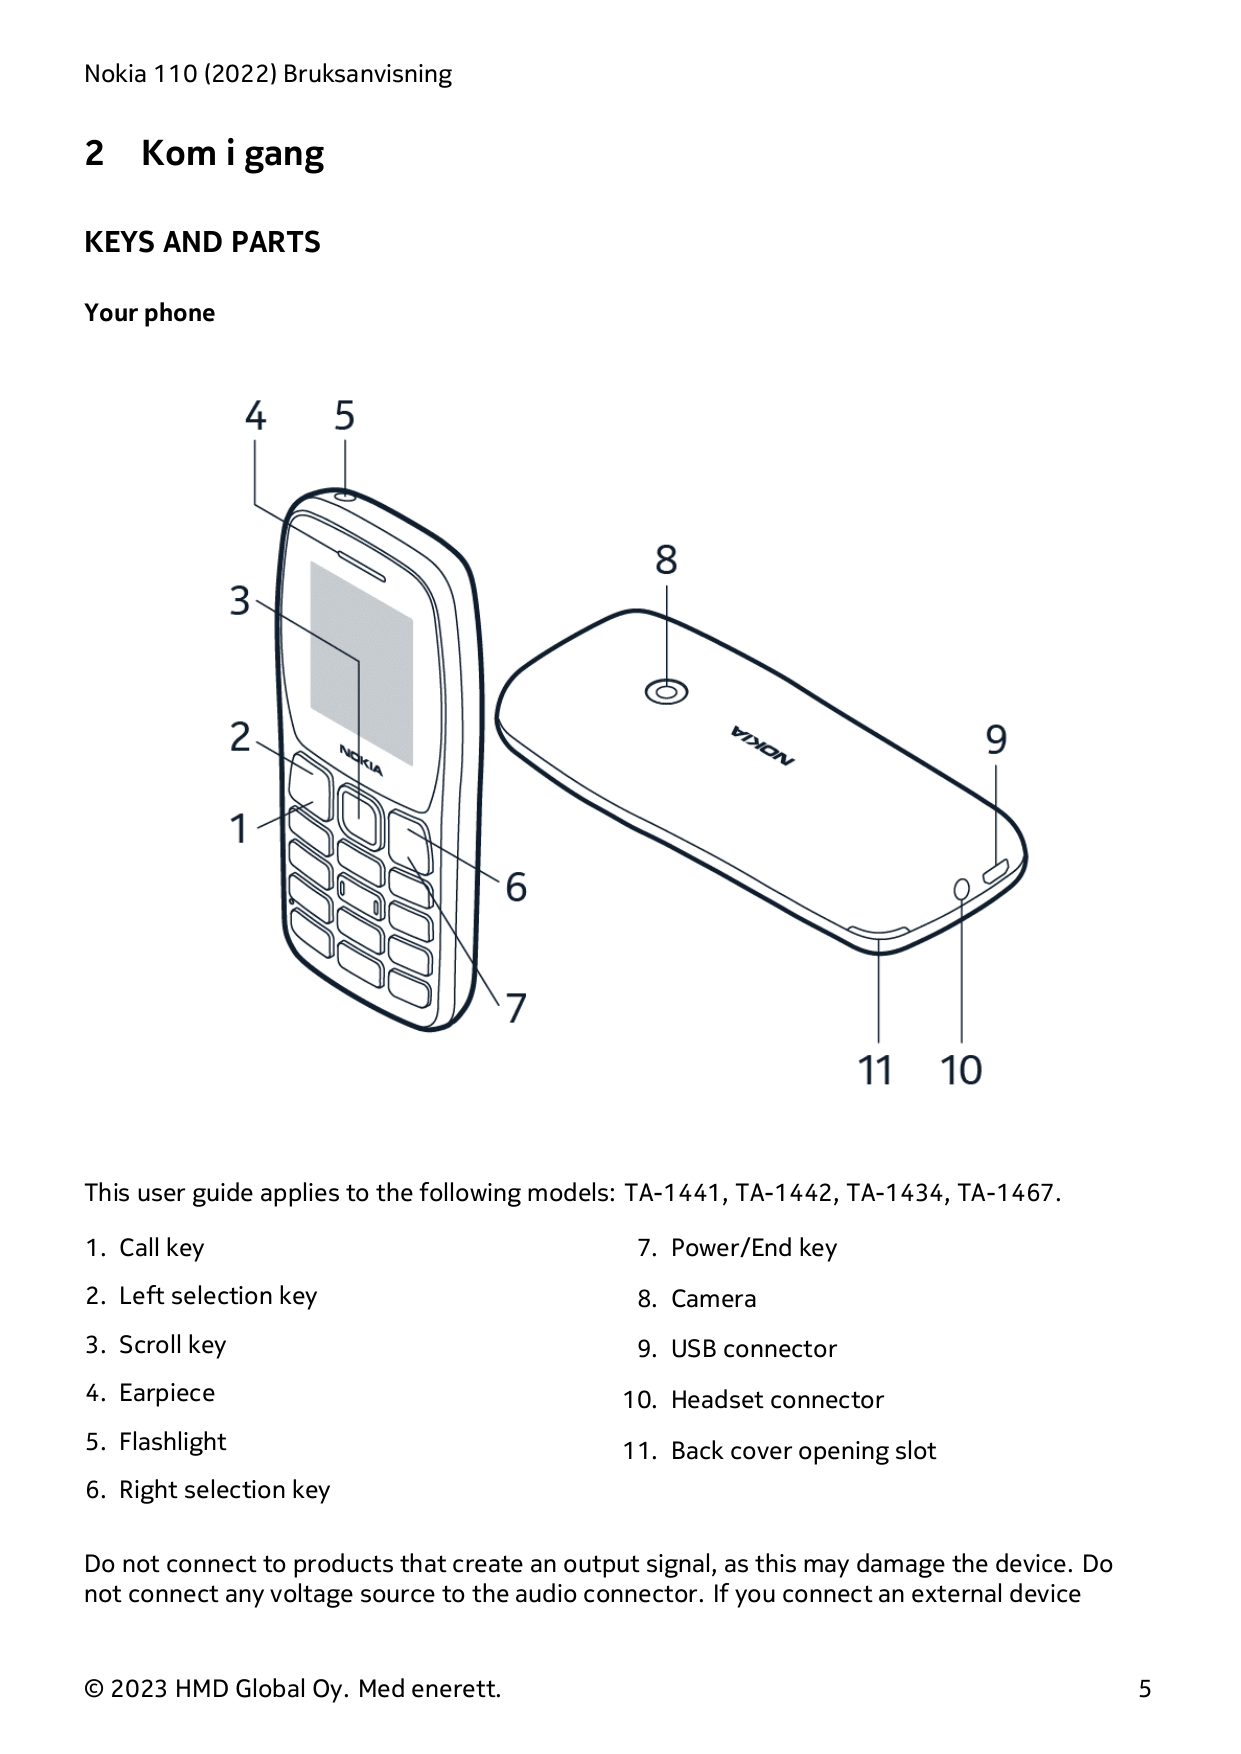 Nokia 110 (2022) Bruksanvisning2Kom i gangKEYS AND PARTSYour phoneThis user guide applies to the following models: TA-1441, TA-1